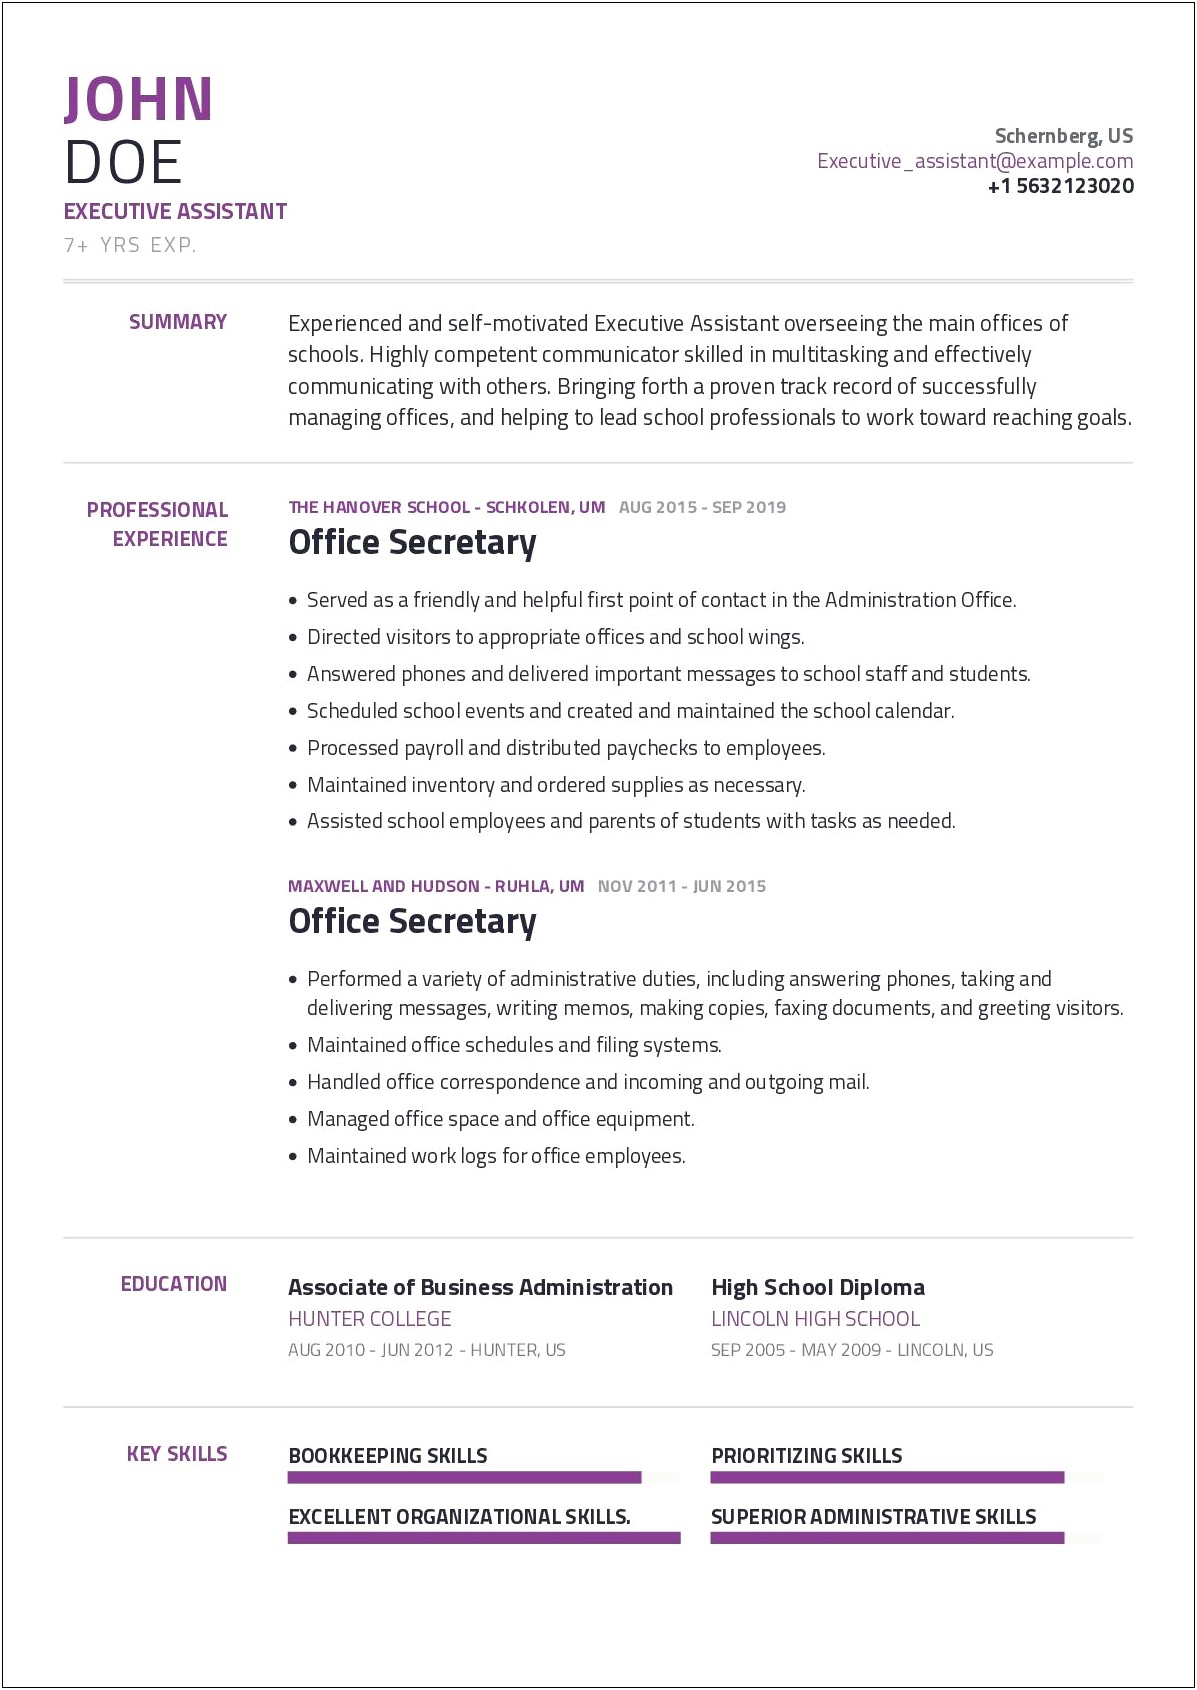 Highlights And Skills On Executive Assistant Resume